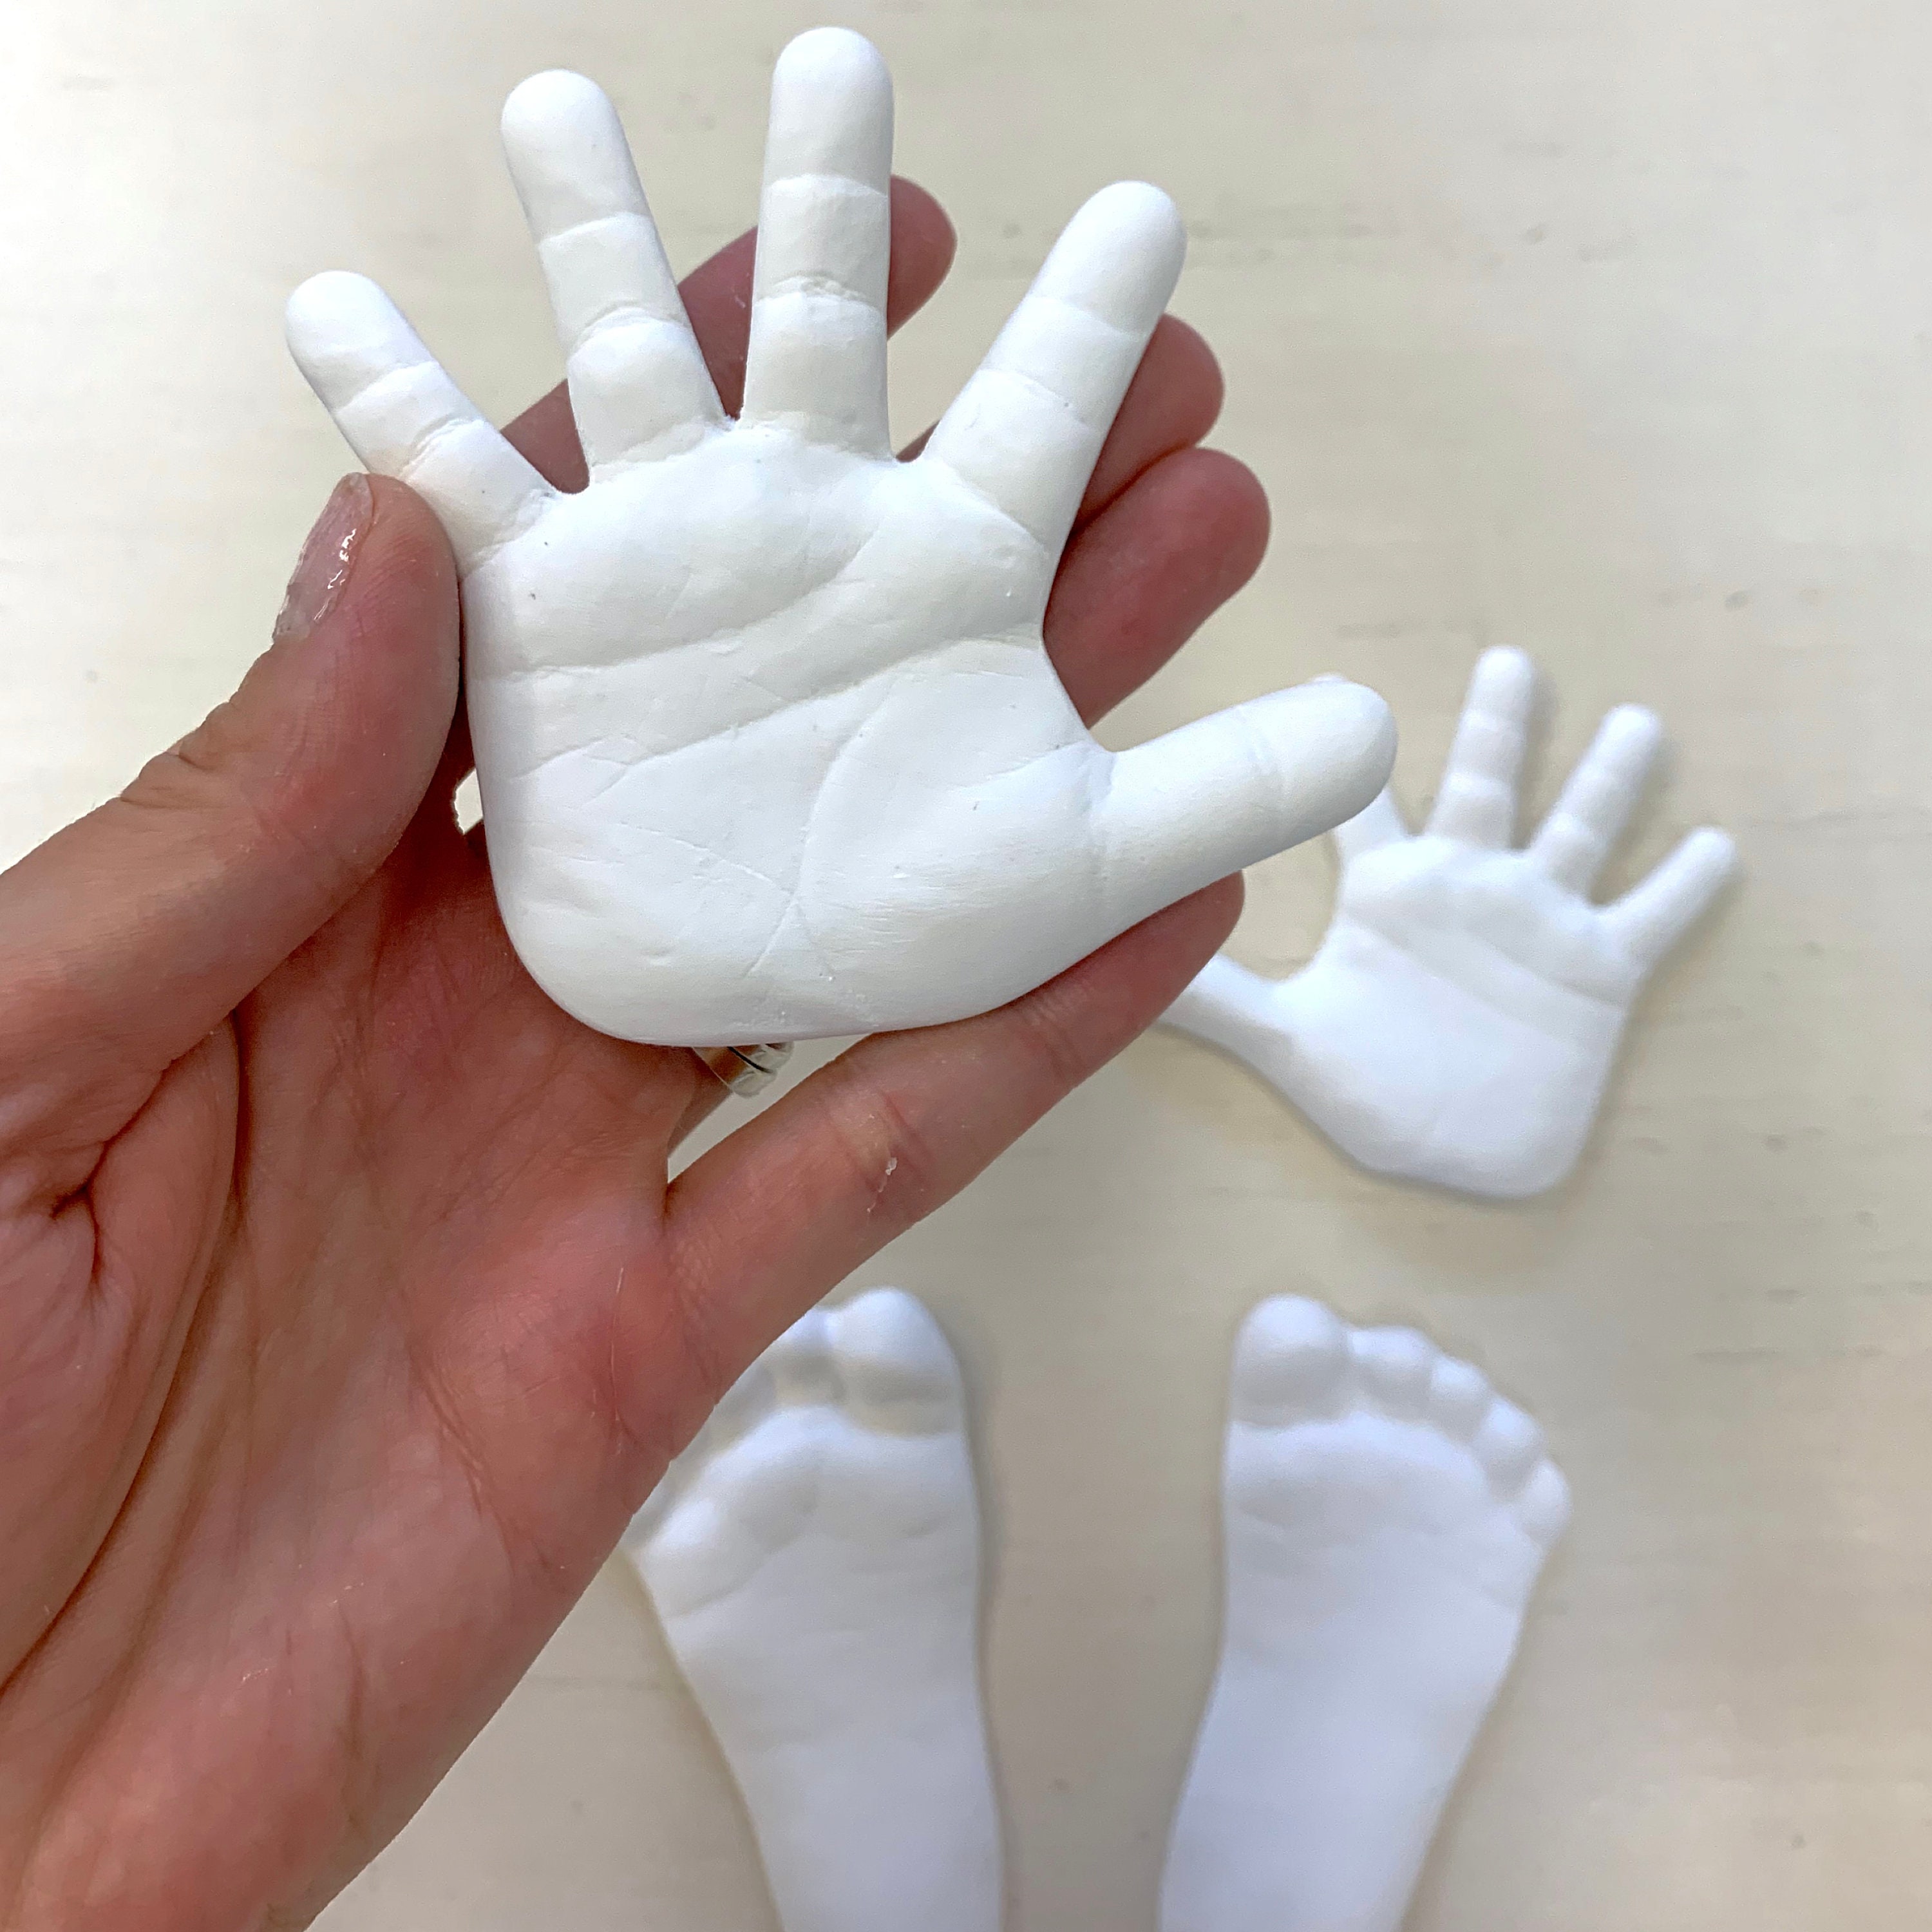 Arts and Crafts for Kids 4-6 Easter DIY Crafts for Adults Soft Clay Fluffy Foam Supplies DIY Baby Care Hand Foot Inkpad Handprint Footprint